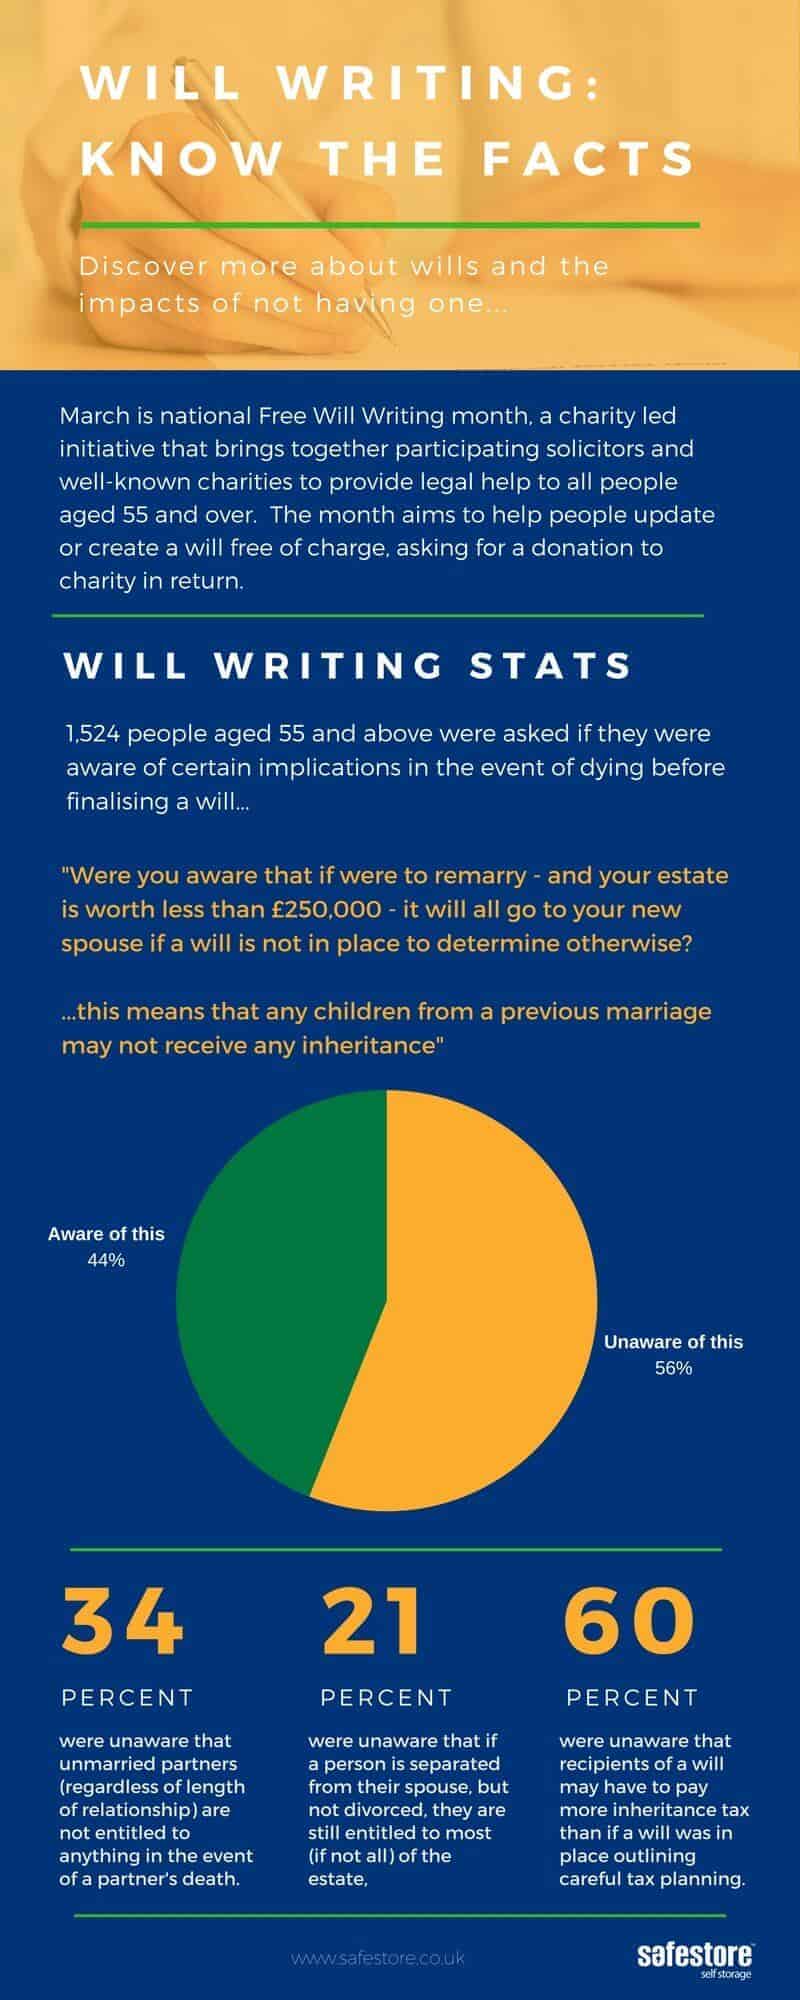 Will writing-know the facts